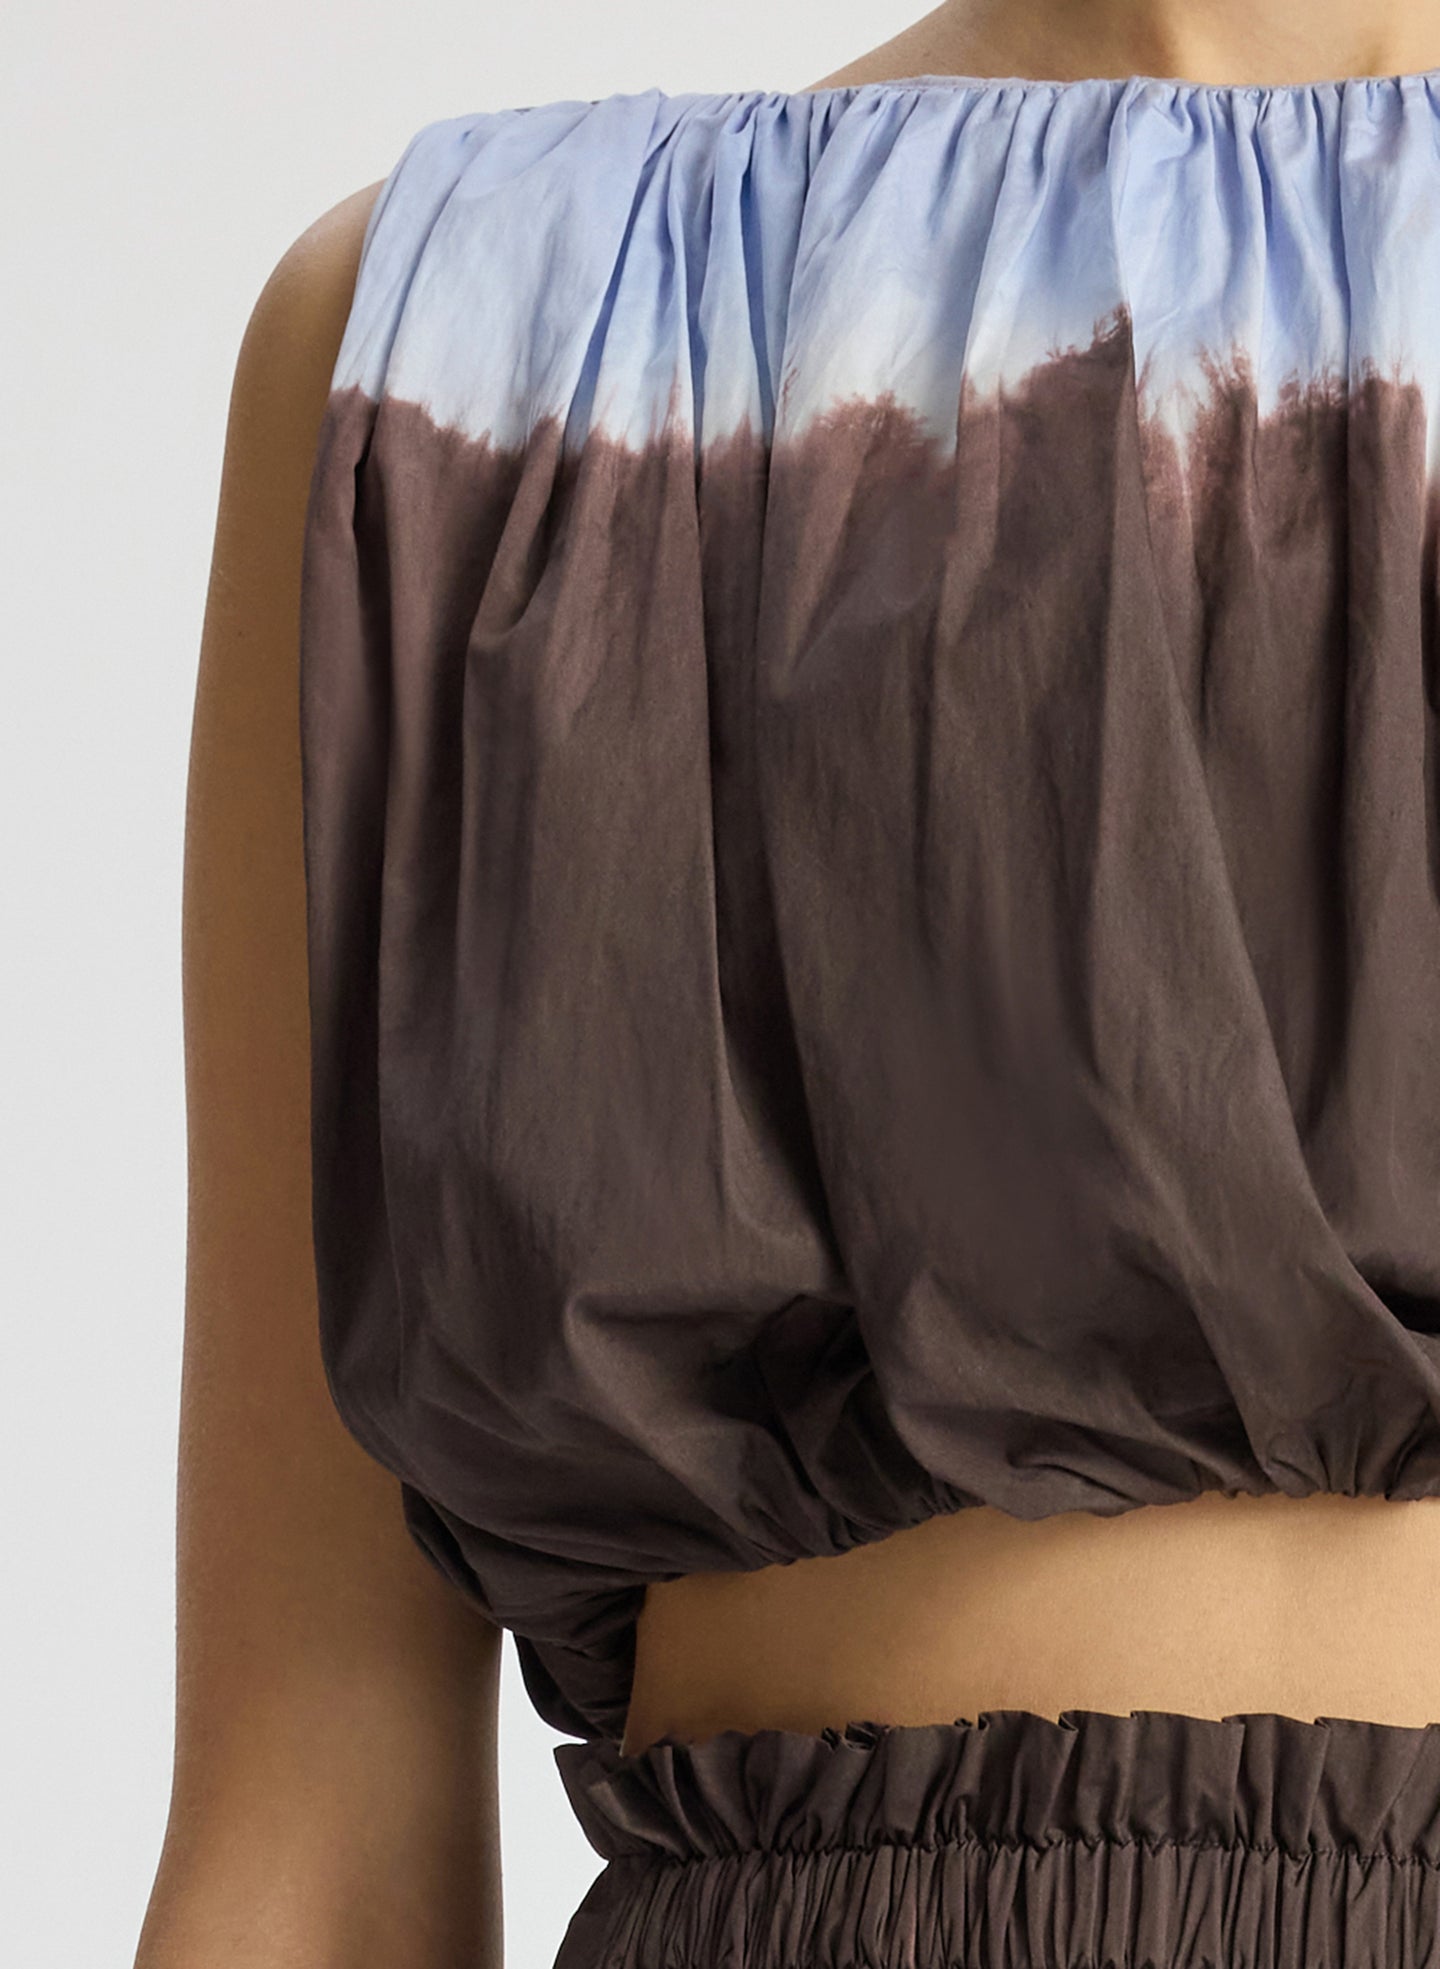 detail view of woman wearing light blue and brown dip dyed sleeveless top and matching midi skirt